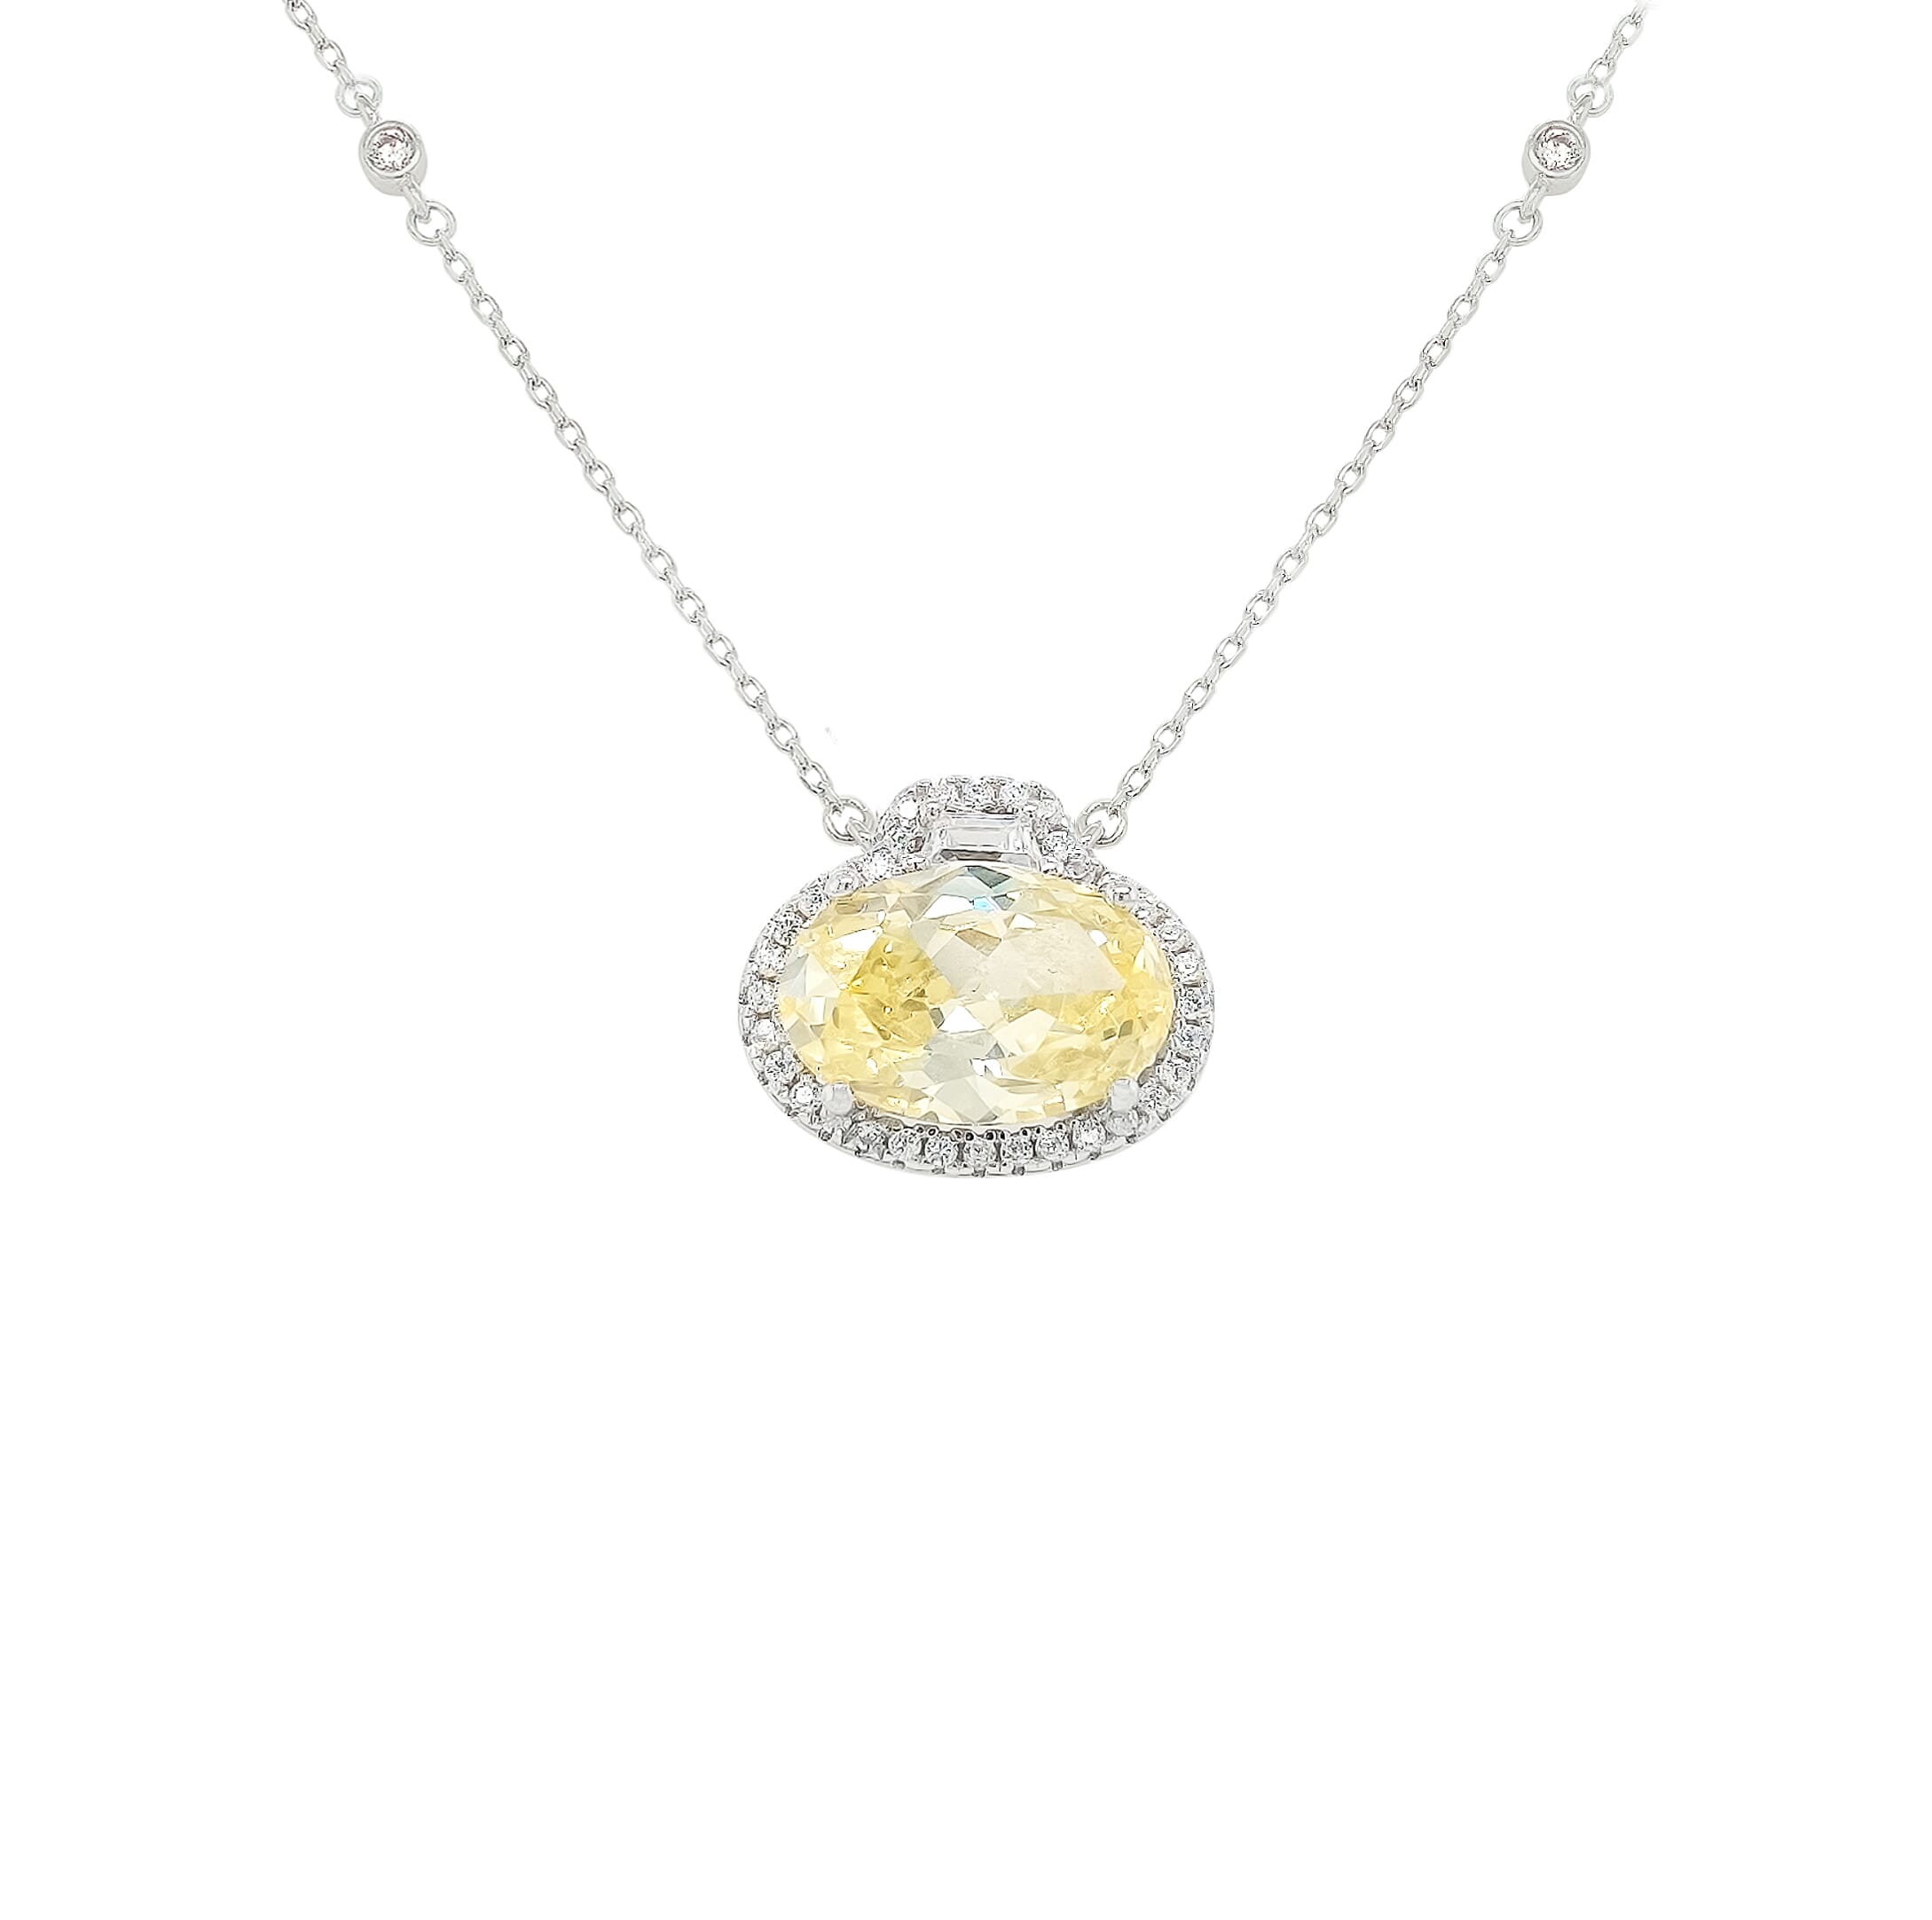 Asfour Crystal Necklaces With Clear & Yellow Zircon NK0028-Y-Silver